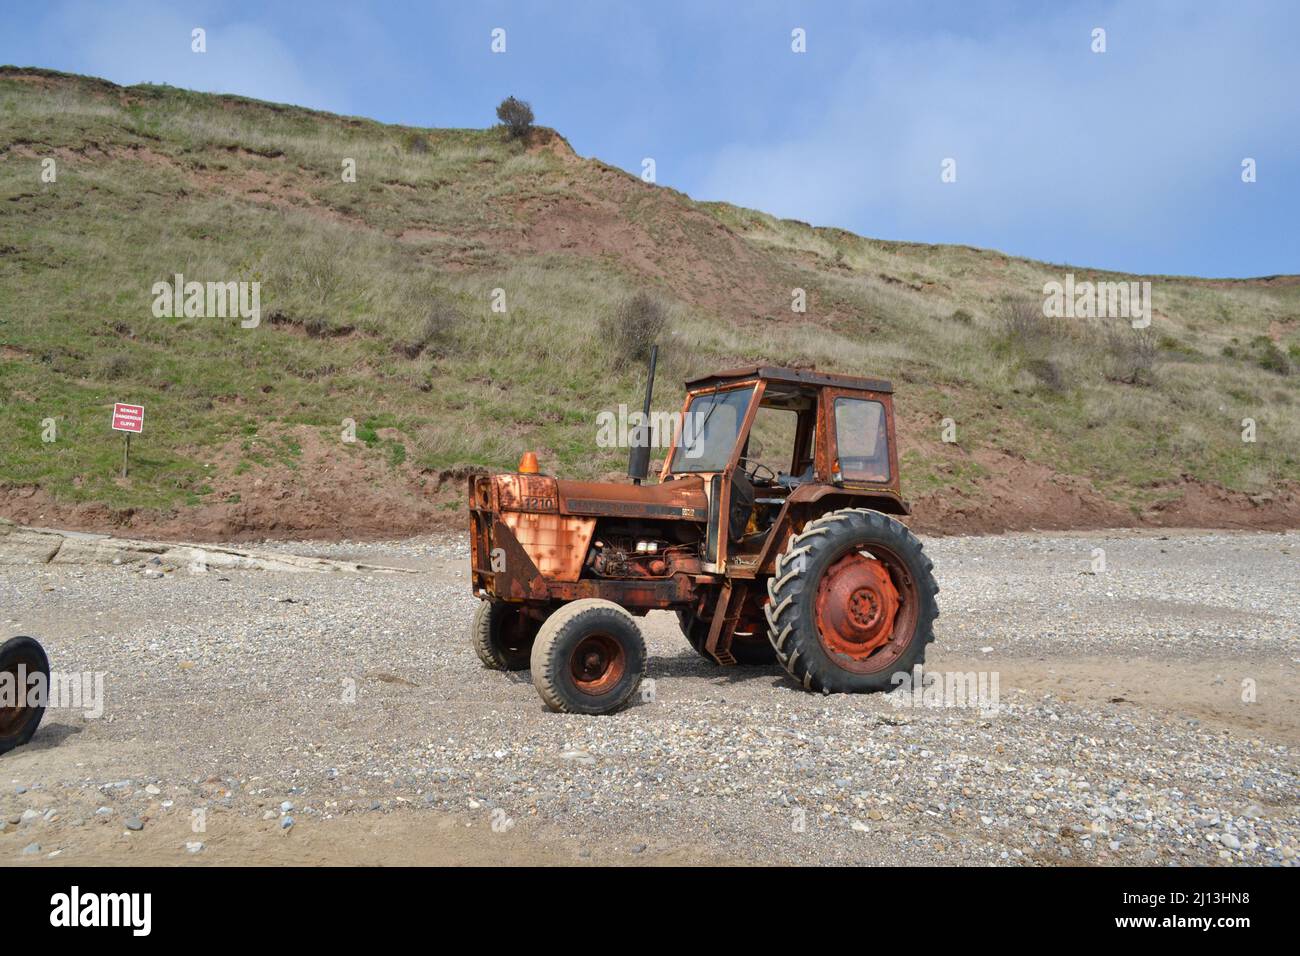 Old Tractor On Filey Beach In The Sunshine - Sand And Stone On Beach - Rusty Tractor - Filey - Yorkshire - UK Stock Photo